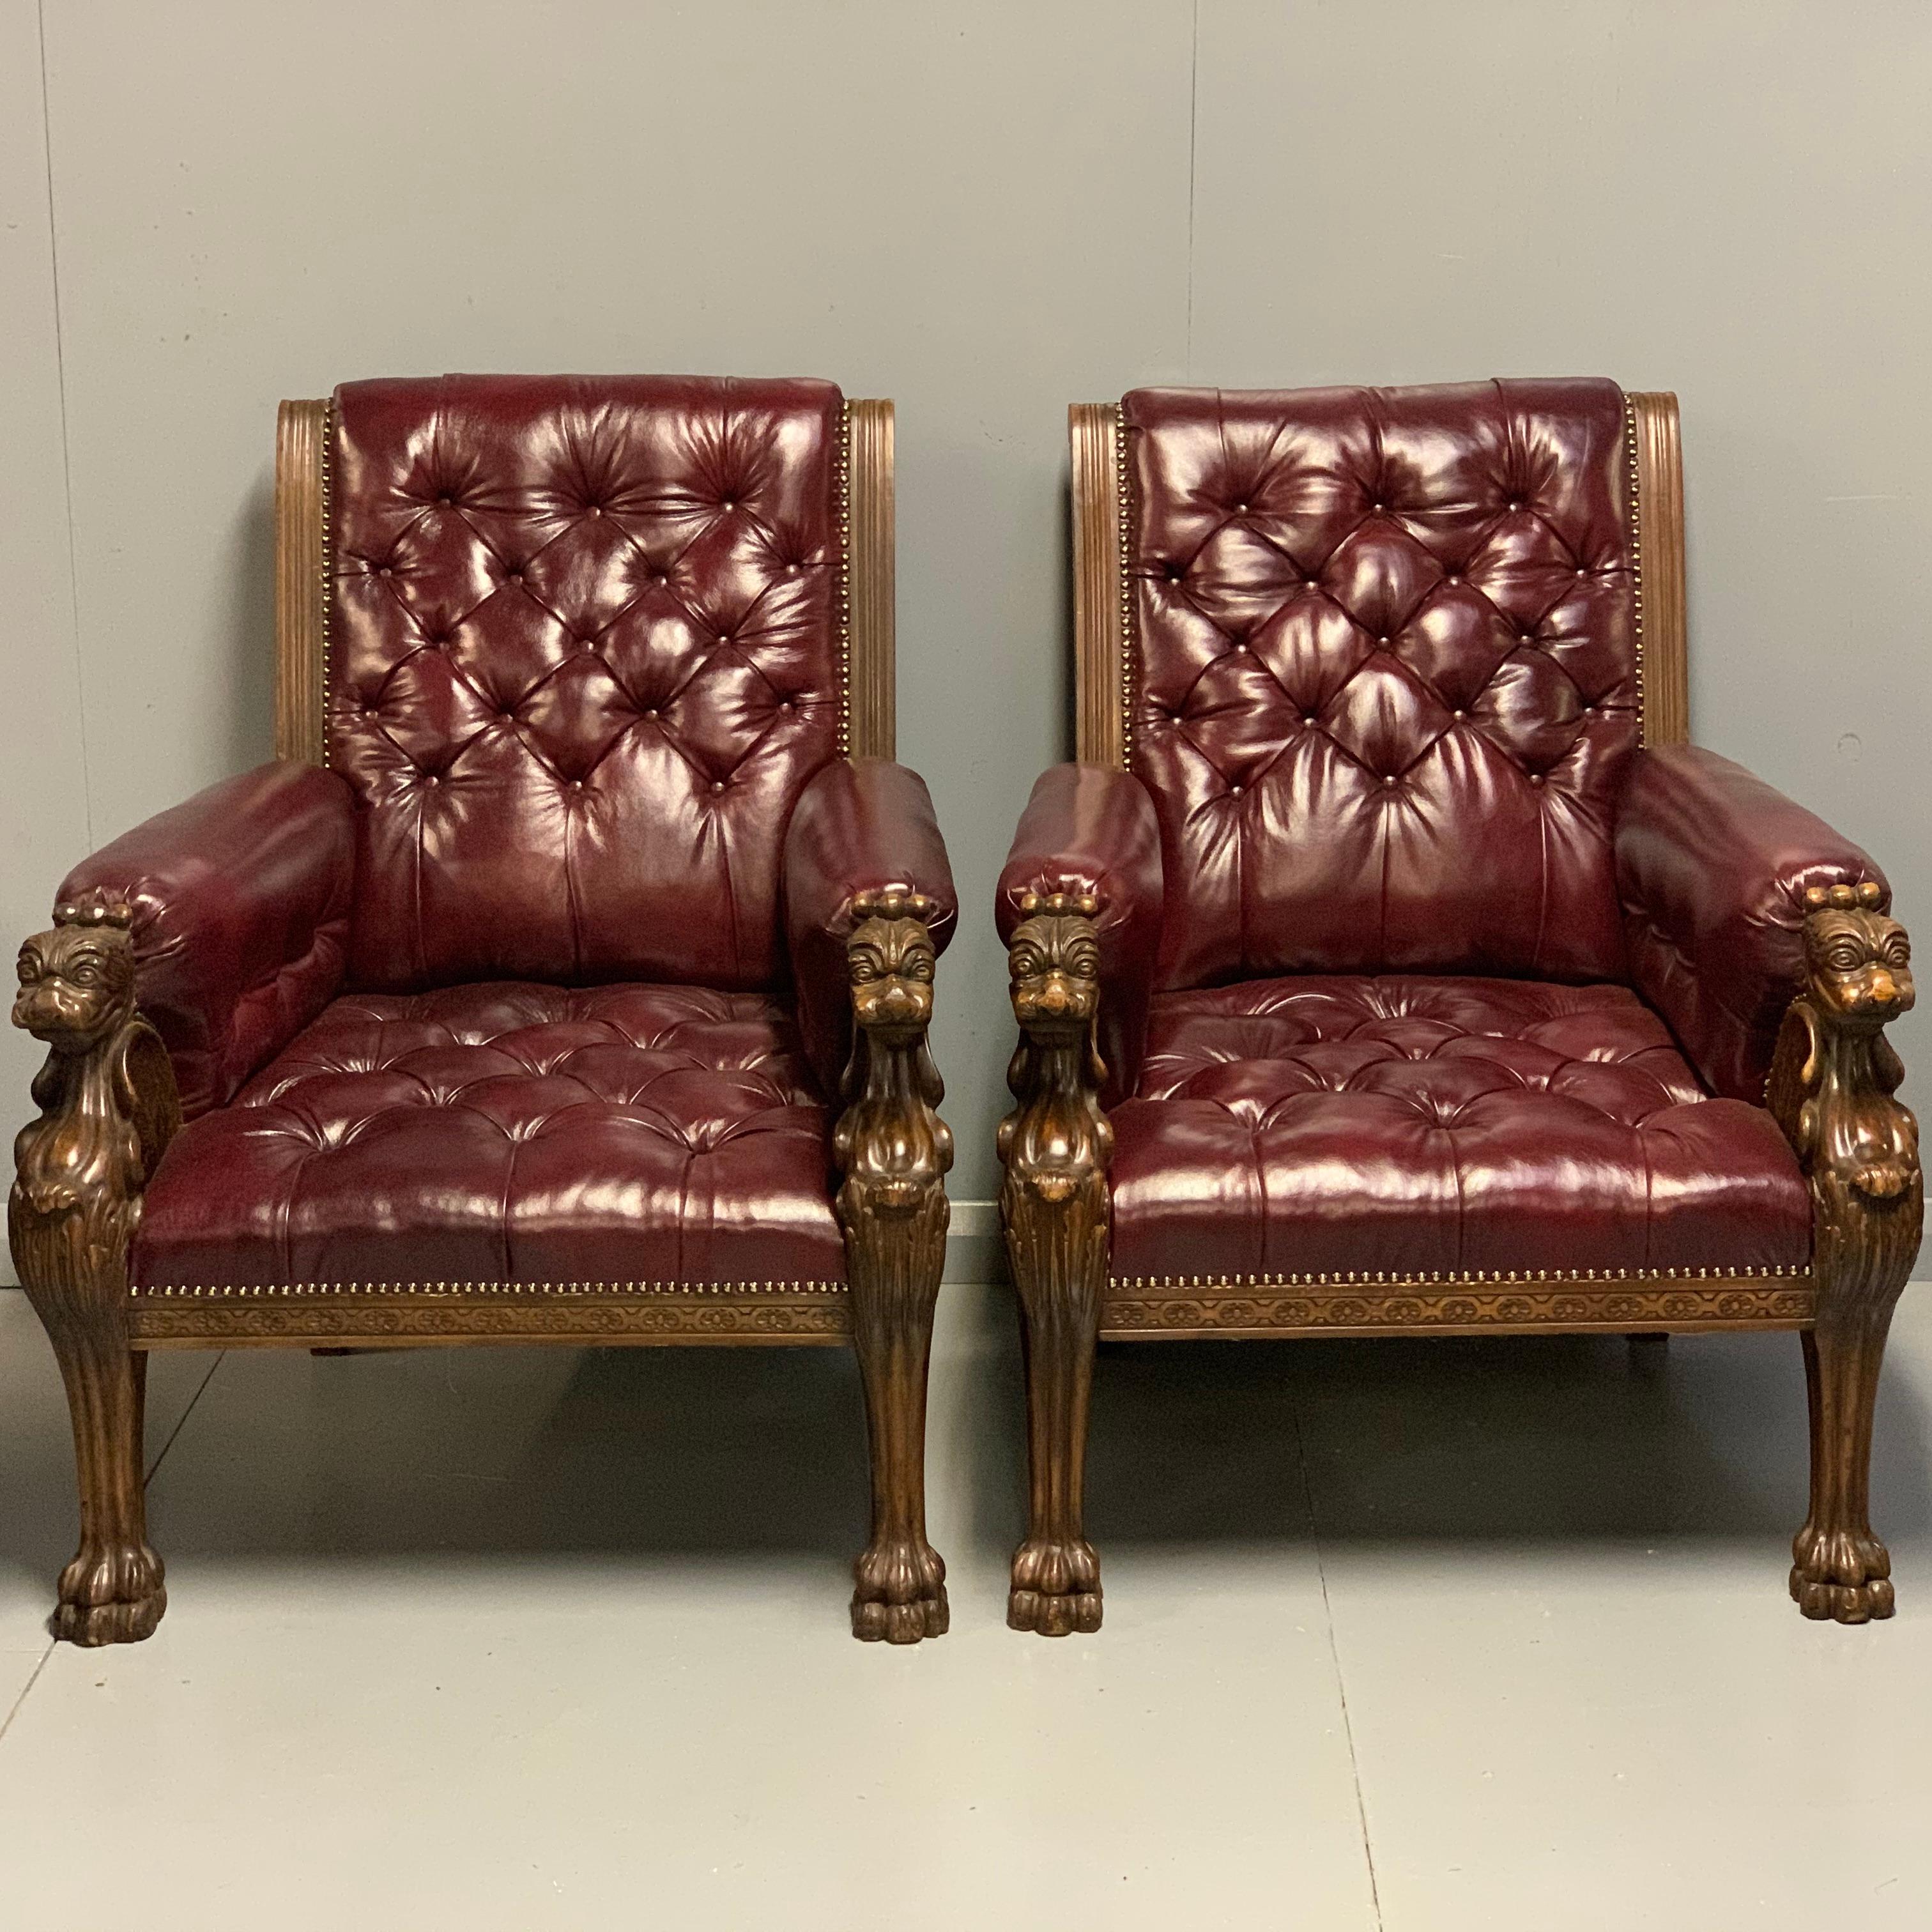 Other Large Pair of Mid-19th Century European Buttoned Leather Armchairs with Griffins For Sale